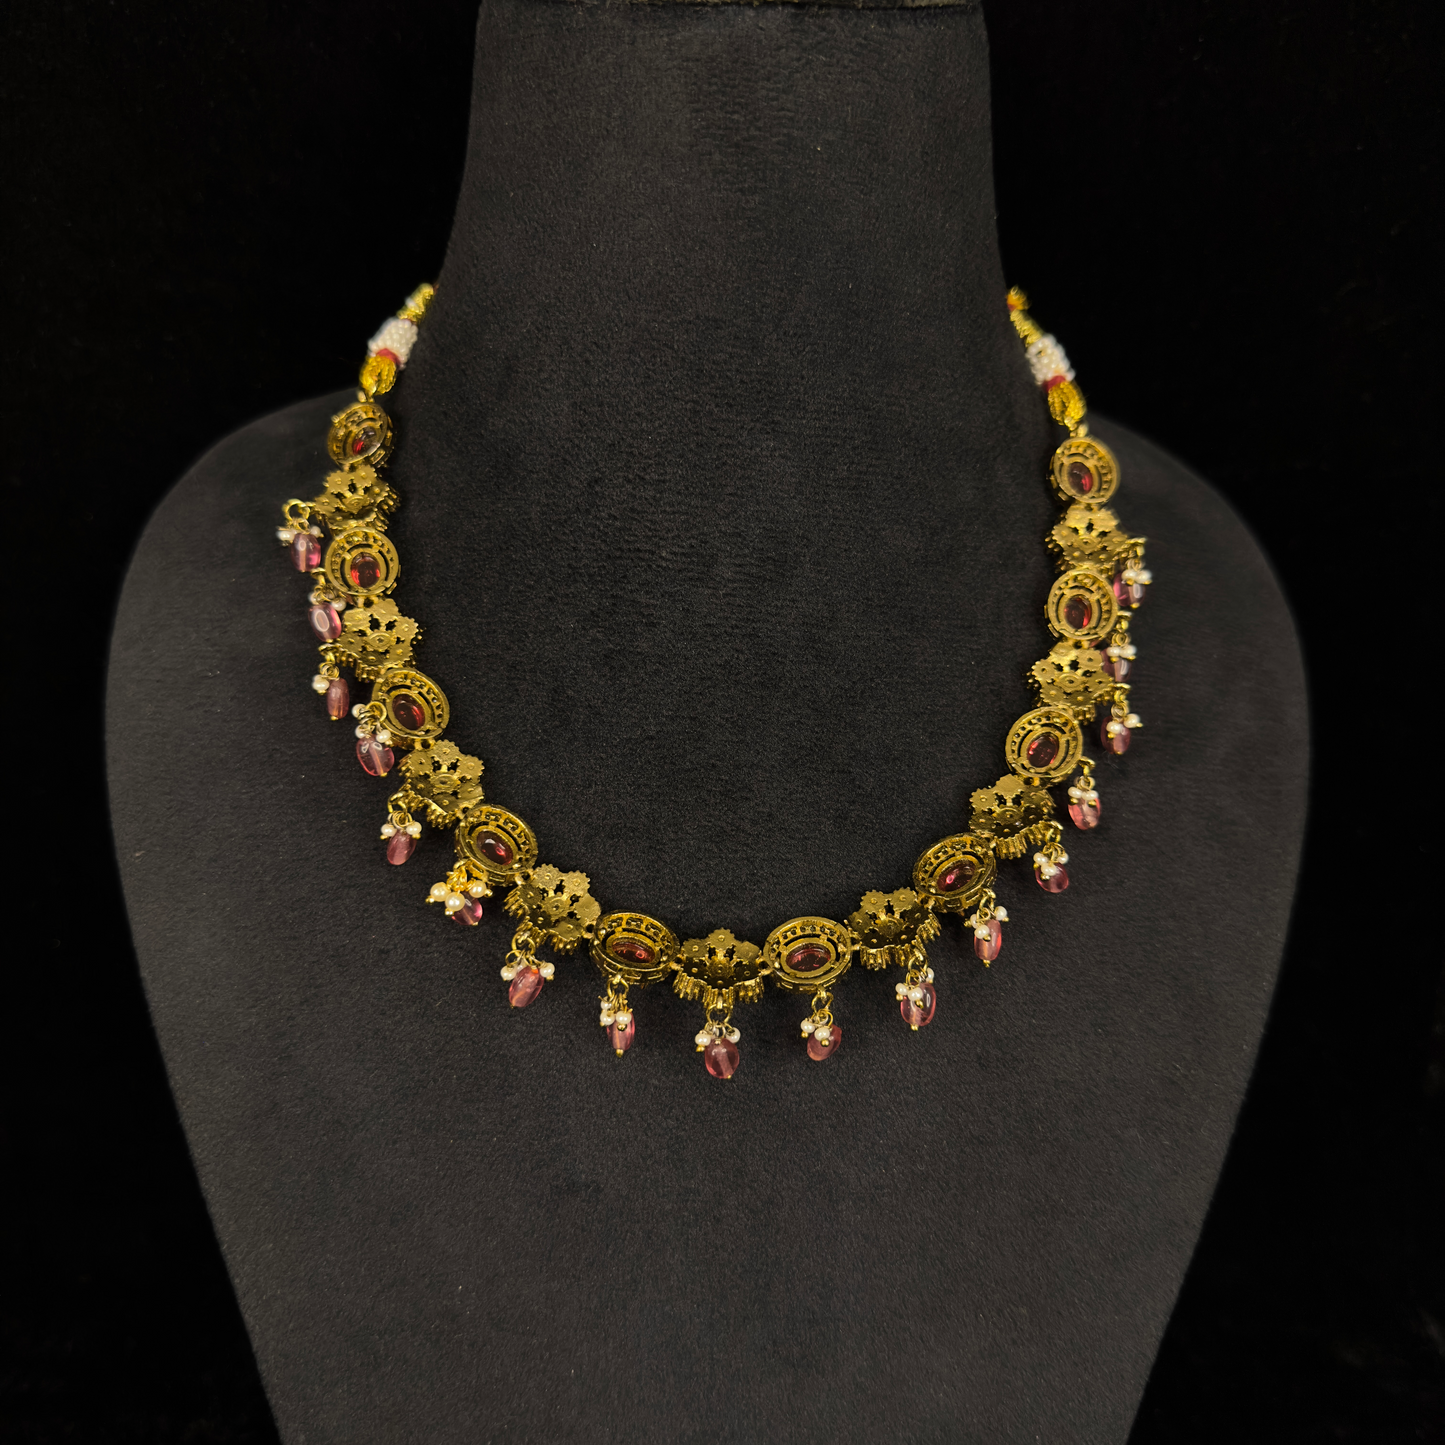 Floral Victorian beads Necklace with earrings